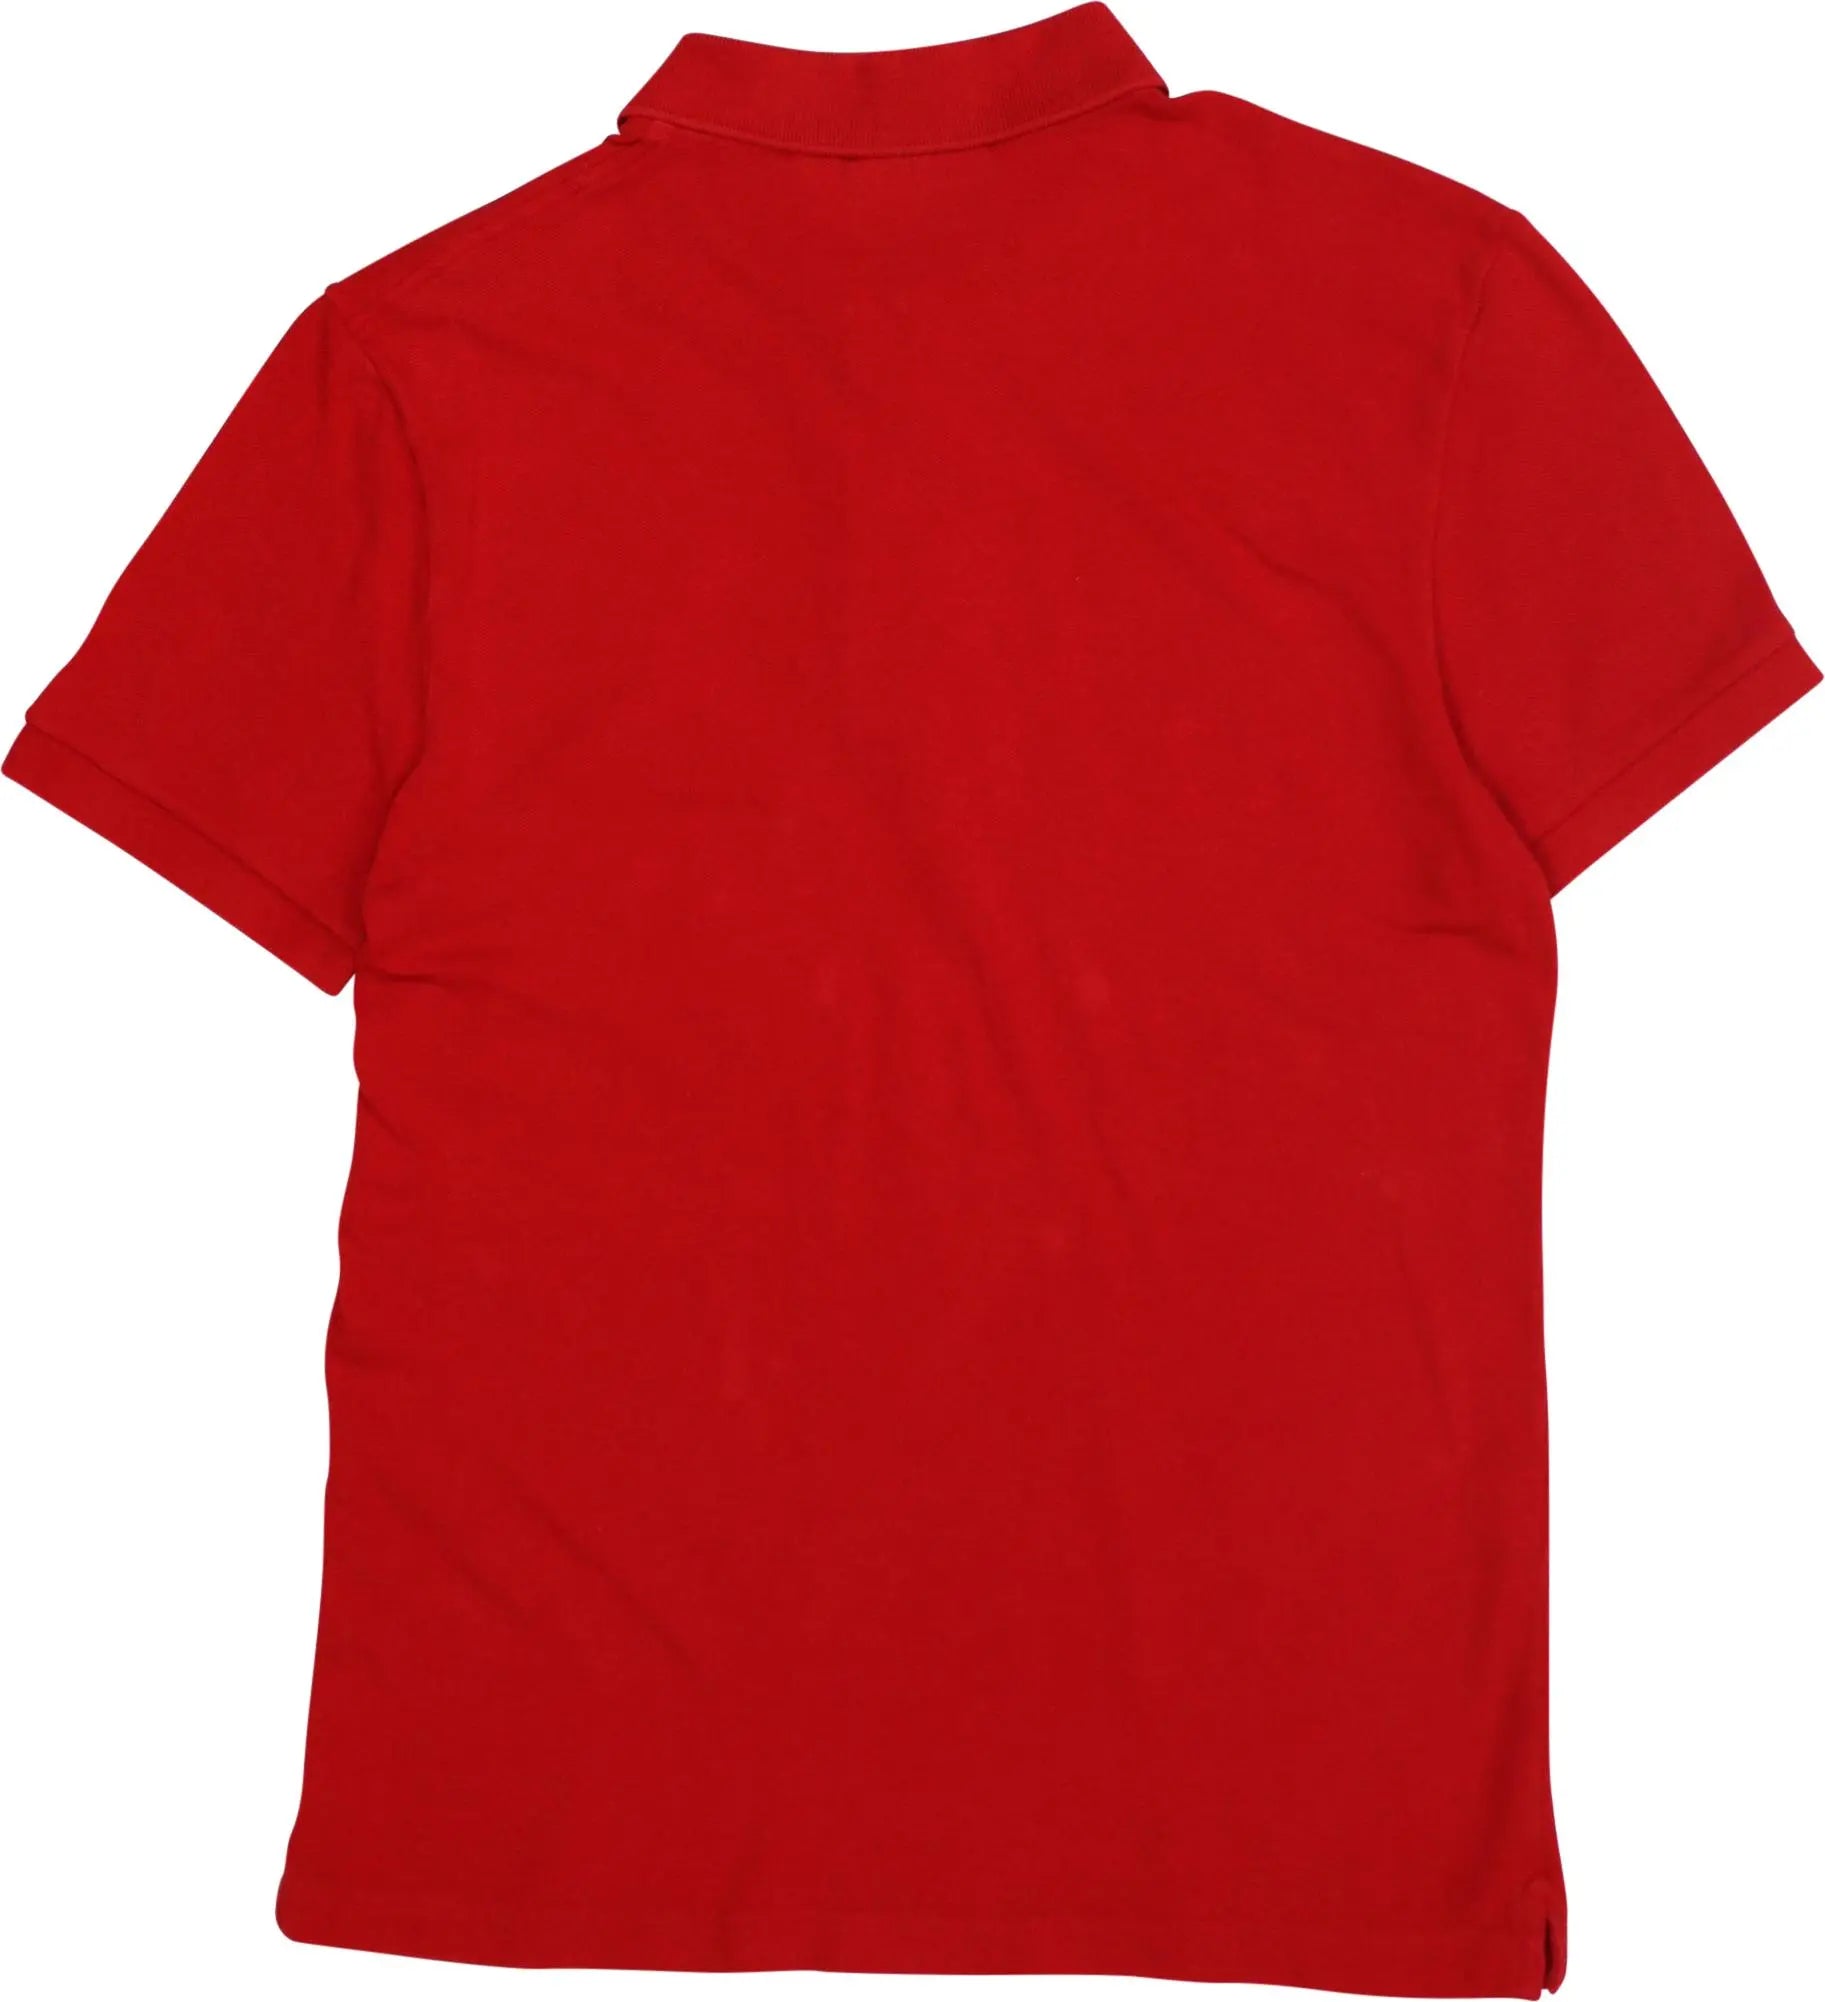 Lacoste - Red Short Sleeve Polo by Lacoste- ThriftTale.com - Vintage and second handclothing